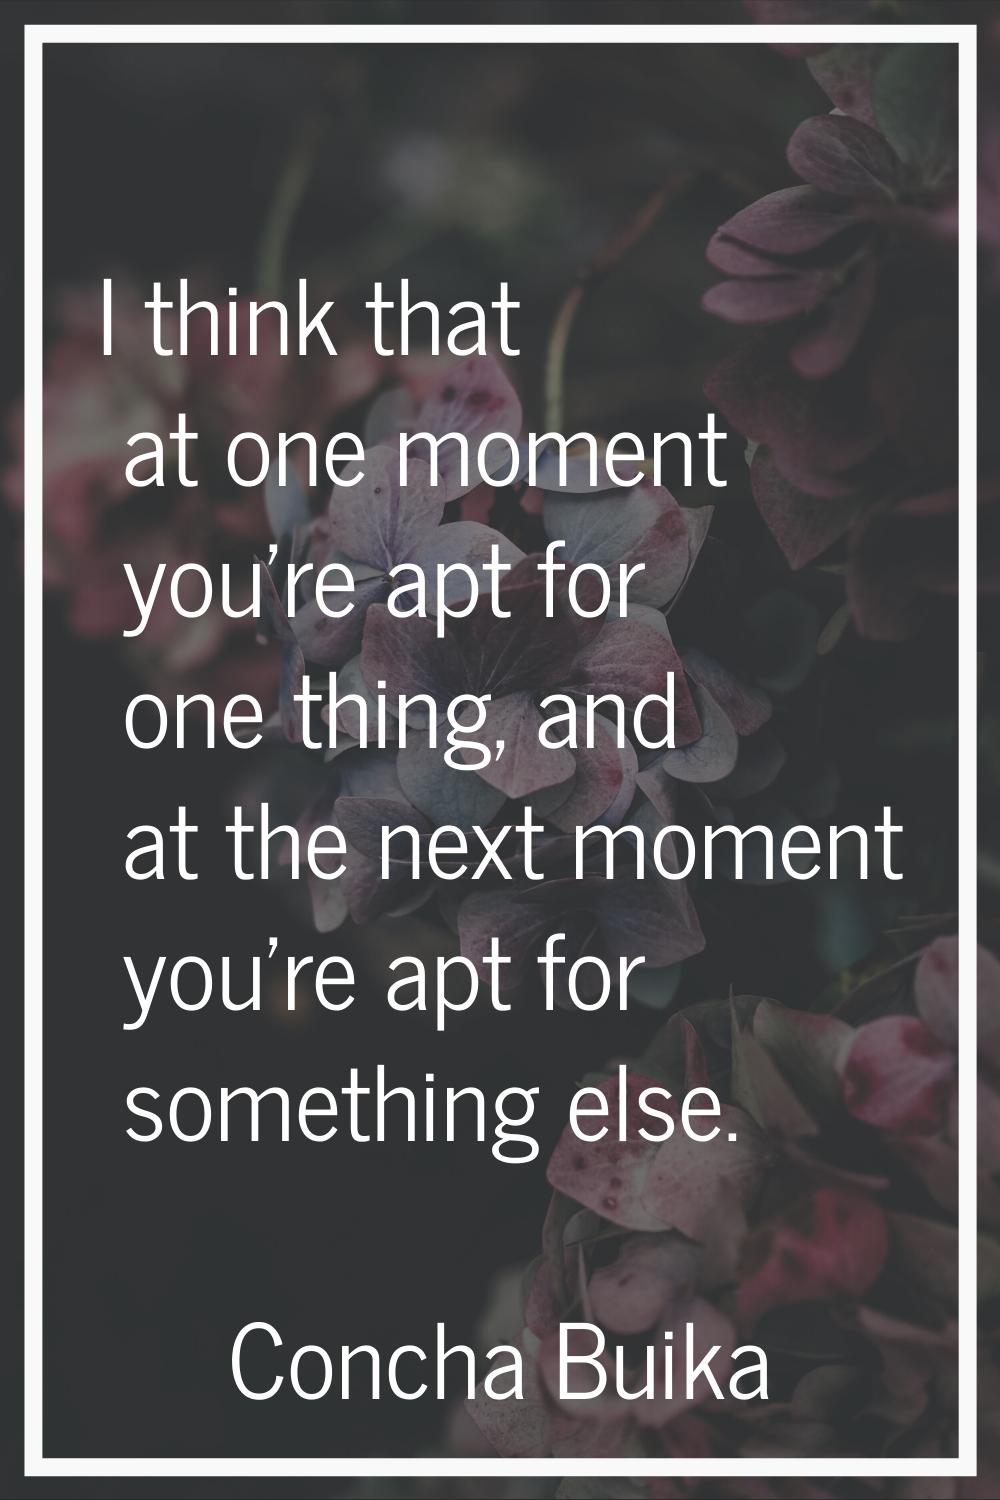 I think that at one moment you're apt for one thing, and at the next moment you're apt for somethin